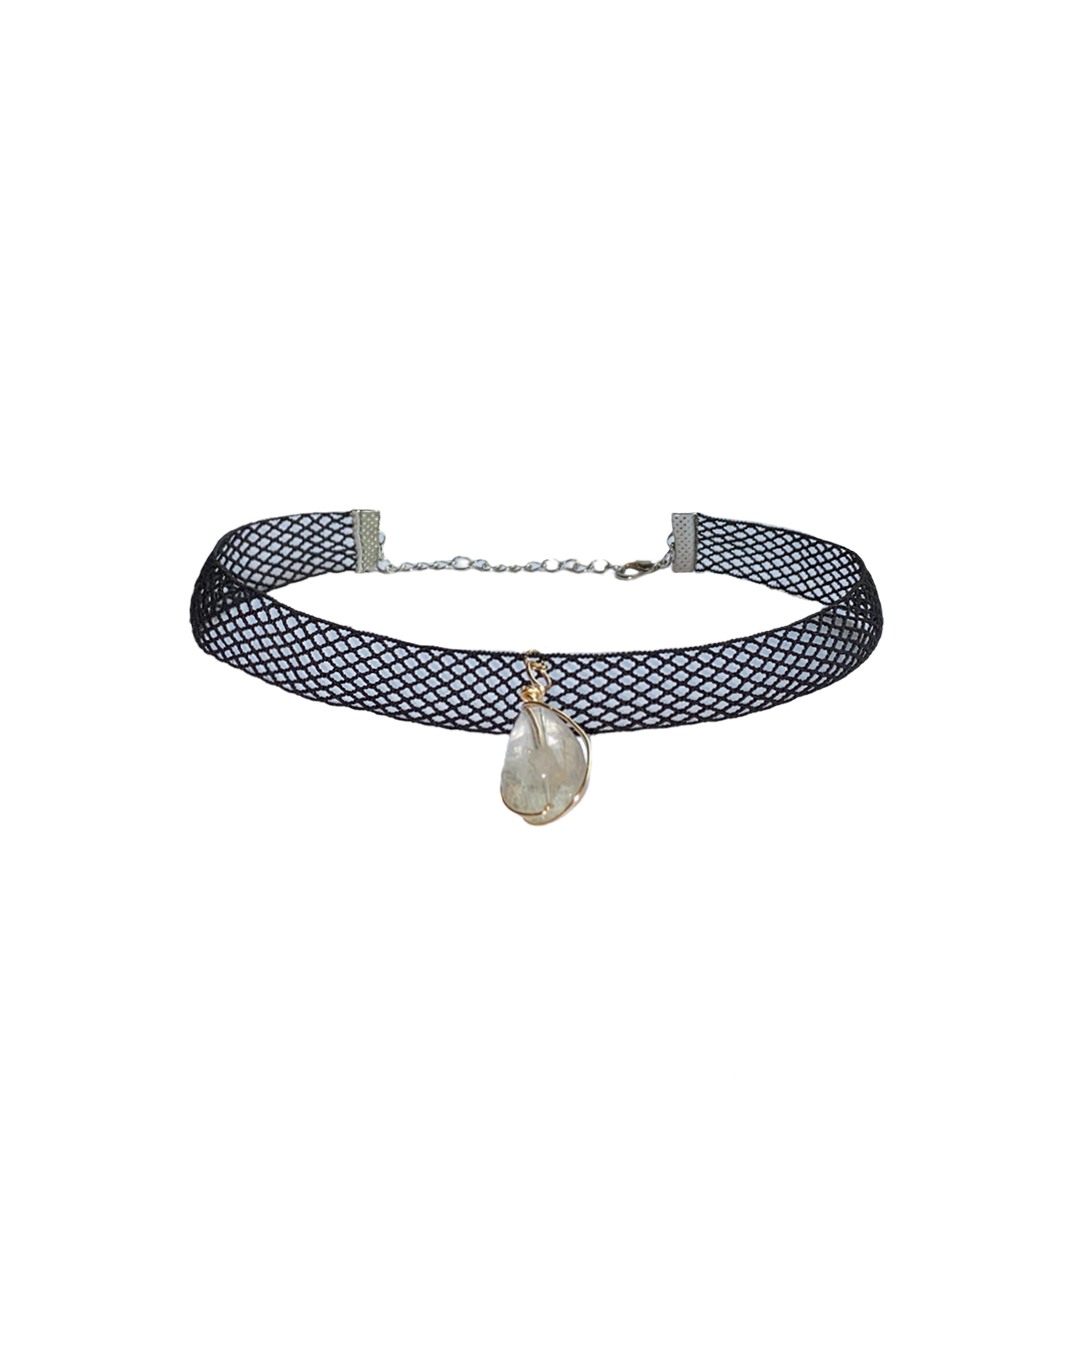 NET CHOCKER WITH CRYSTAL STONE DETAIL